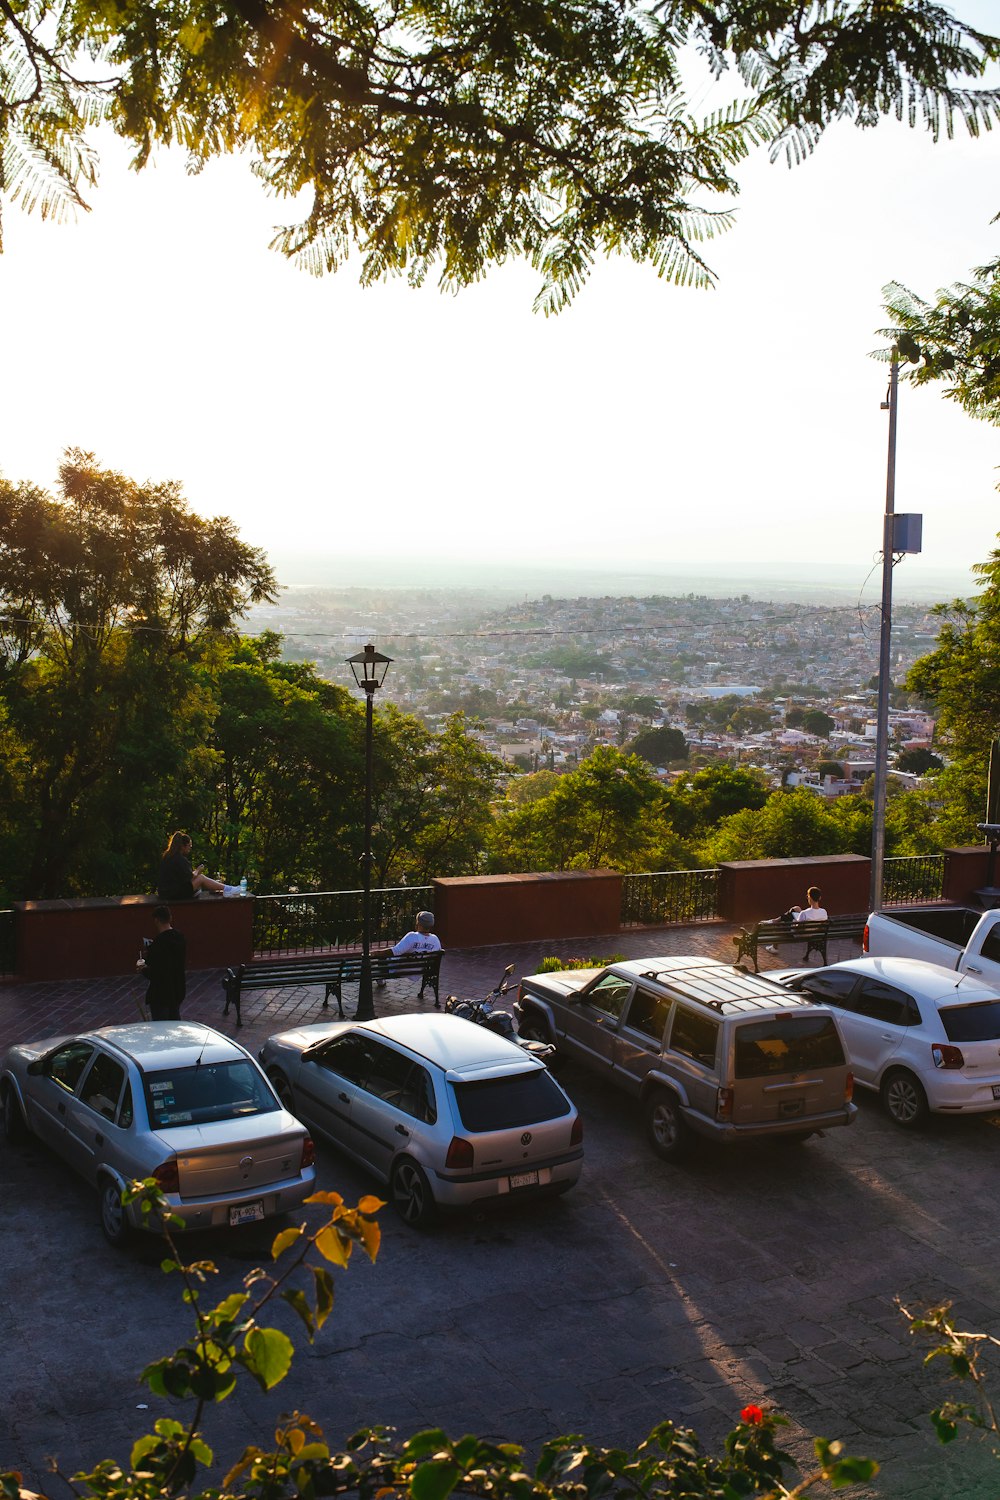 a group of cars parked on a street with a city in the background